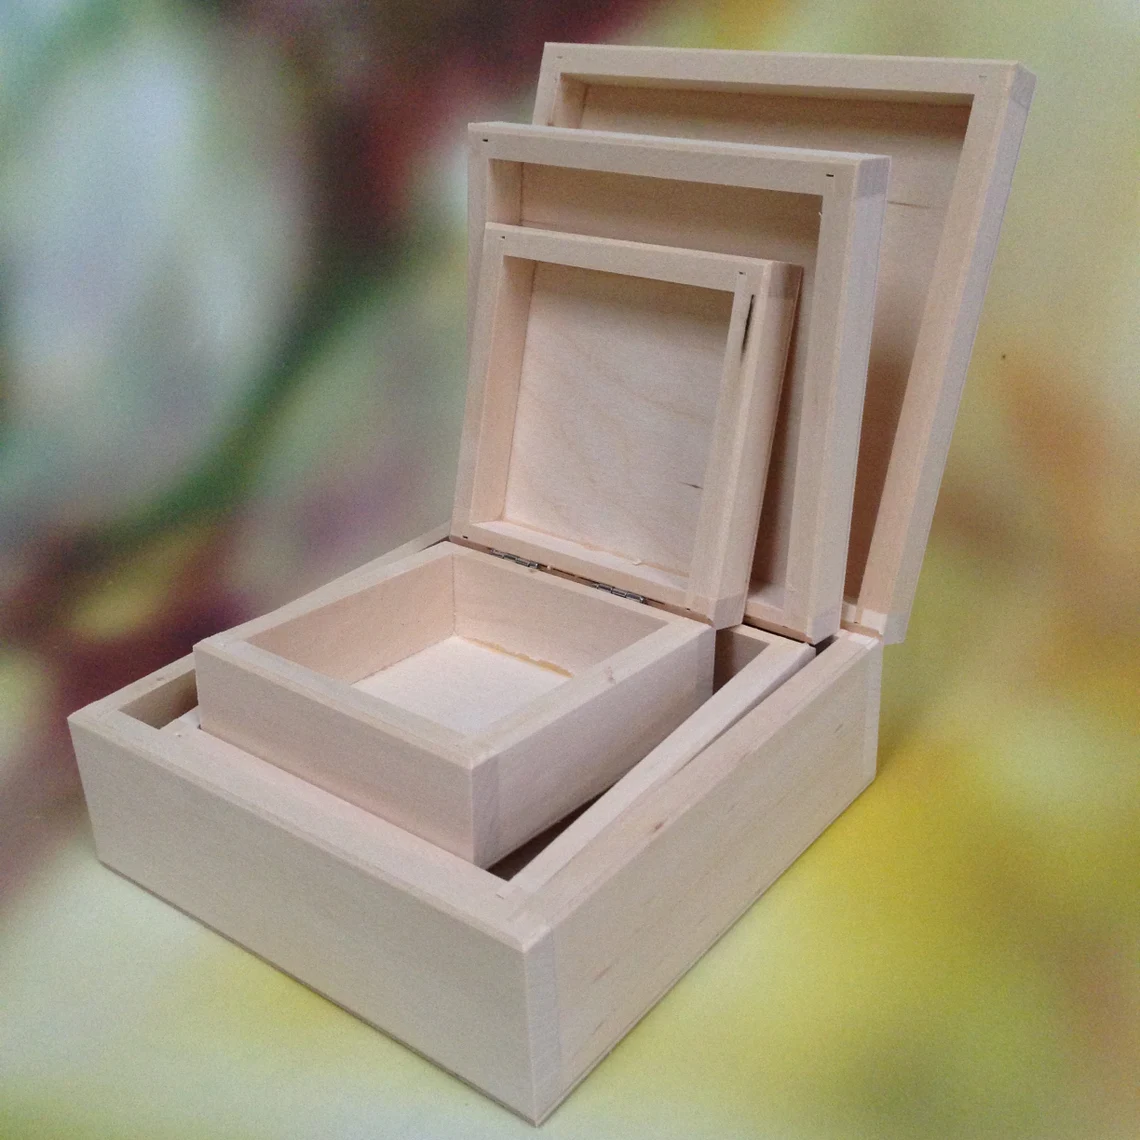 3in1 Wooden Set Of Plain Square Boxes